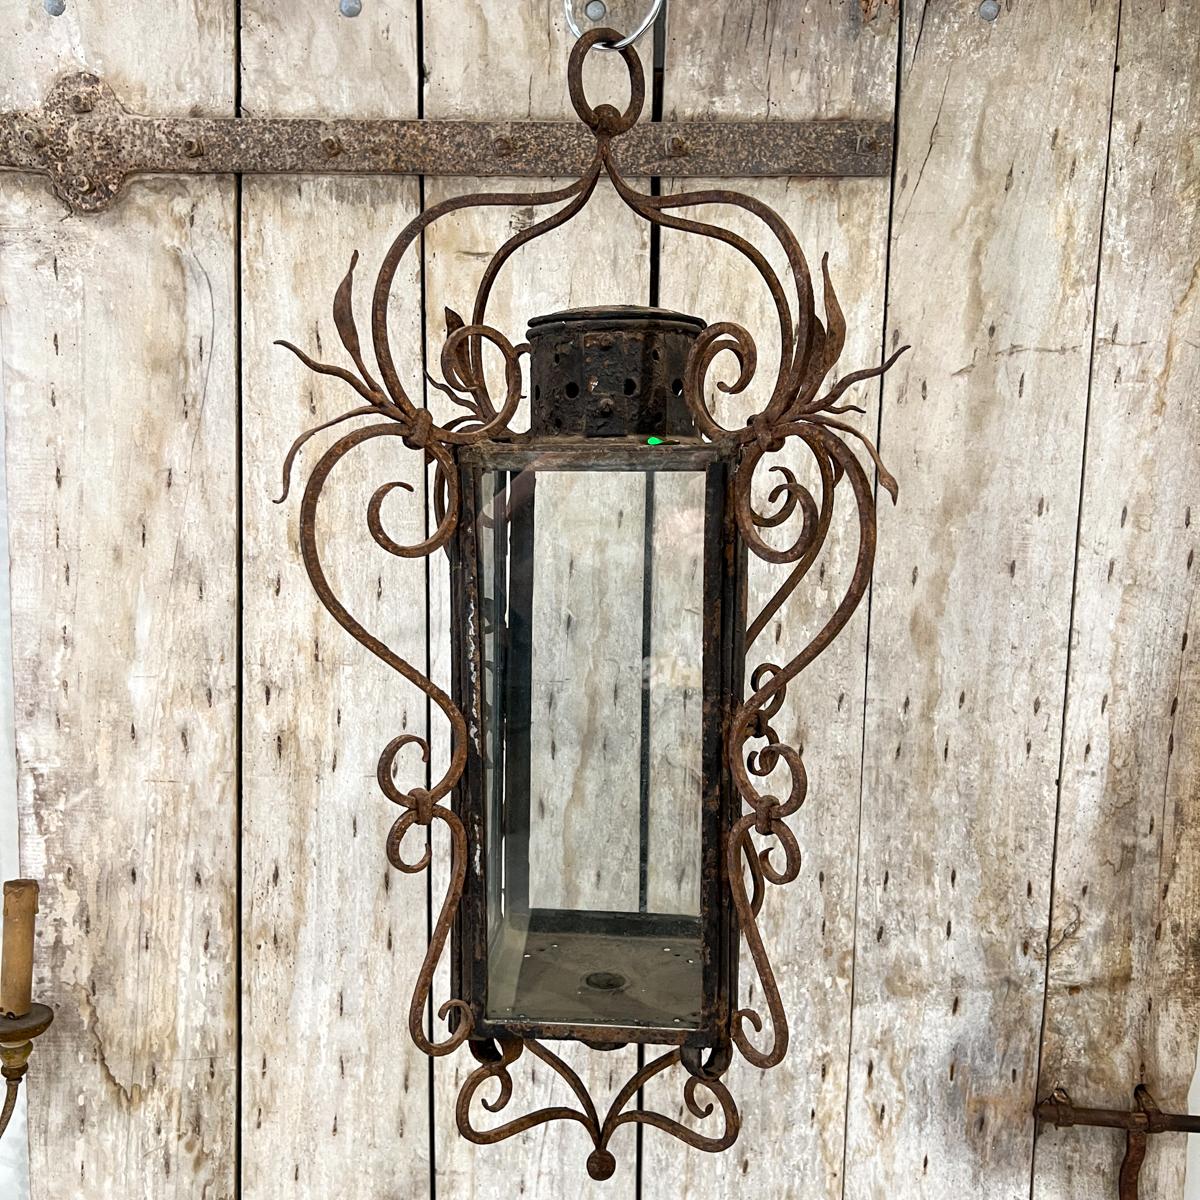 There is truly fine ironwork on this tall slender lantern.  Each corner has carefully wrought leaves and twisted spikes.  The tall, narrow size makes this piece perfect for the smaller space either inside or outside.  All glass is intact, one piece